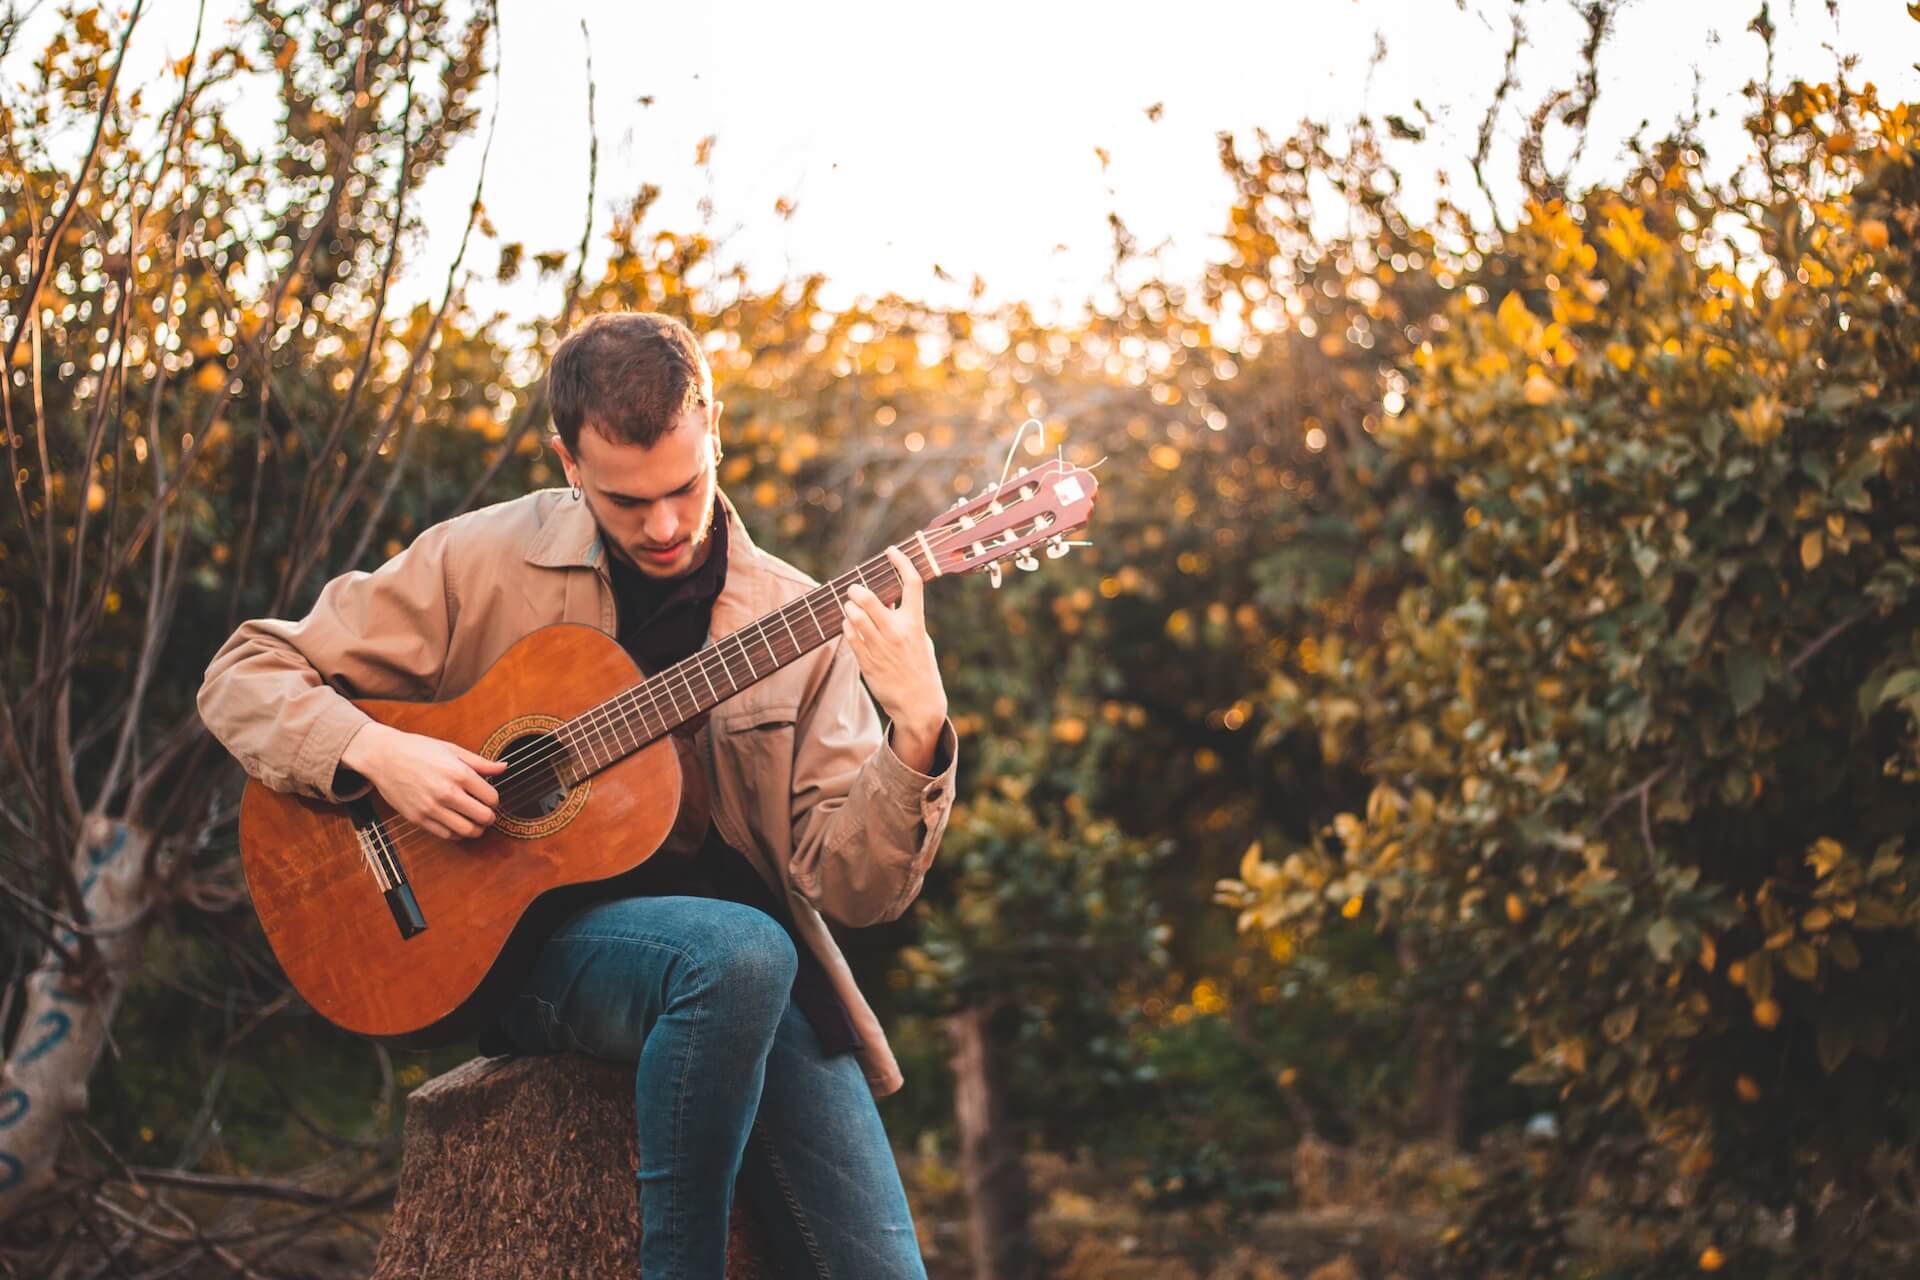 A man holding and strumming a guitar